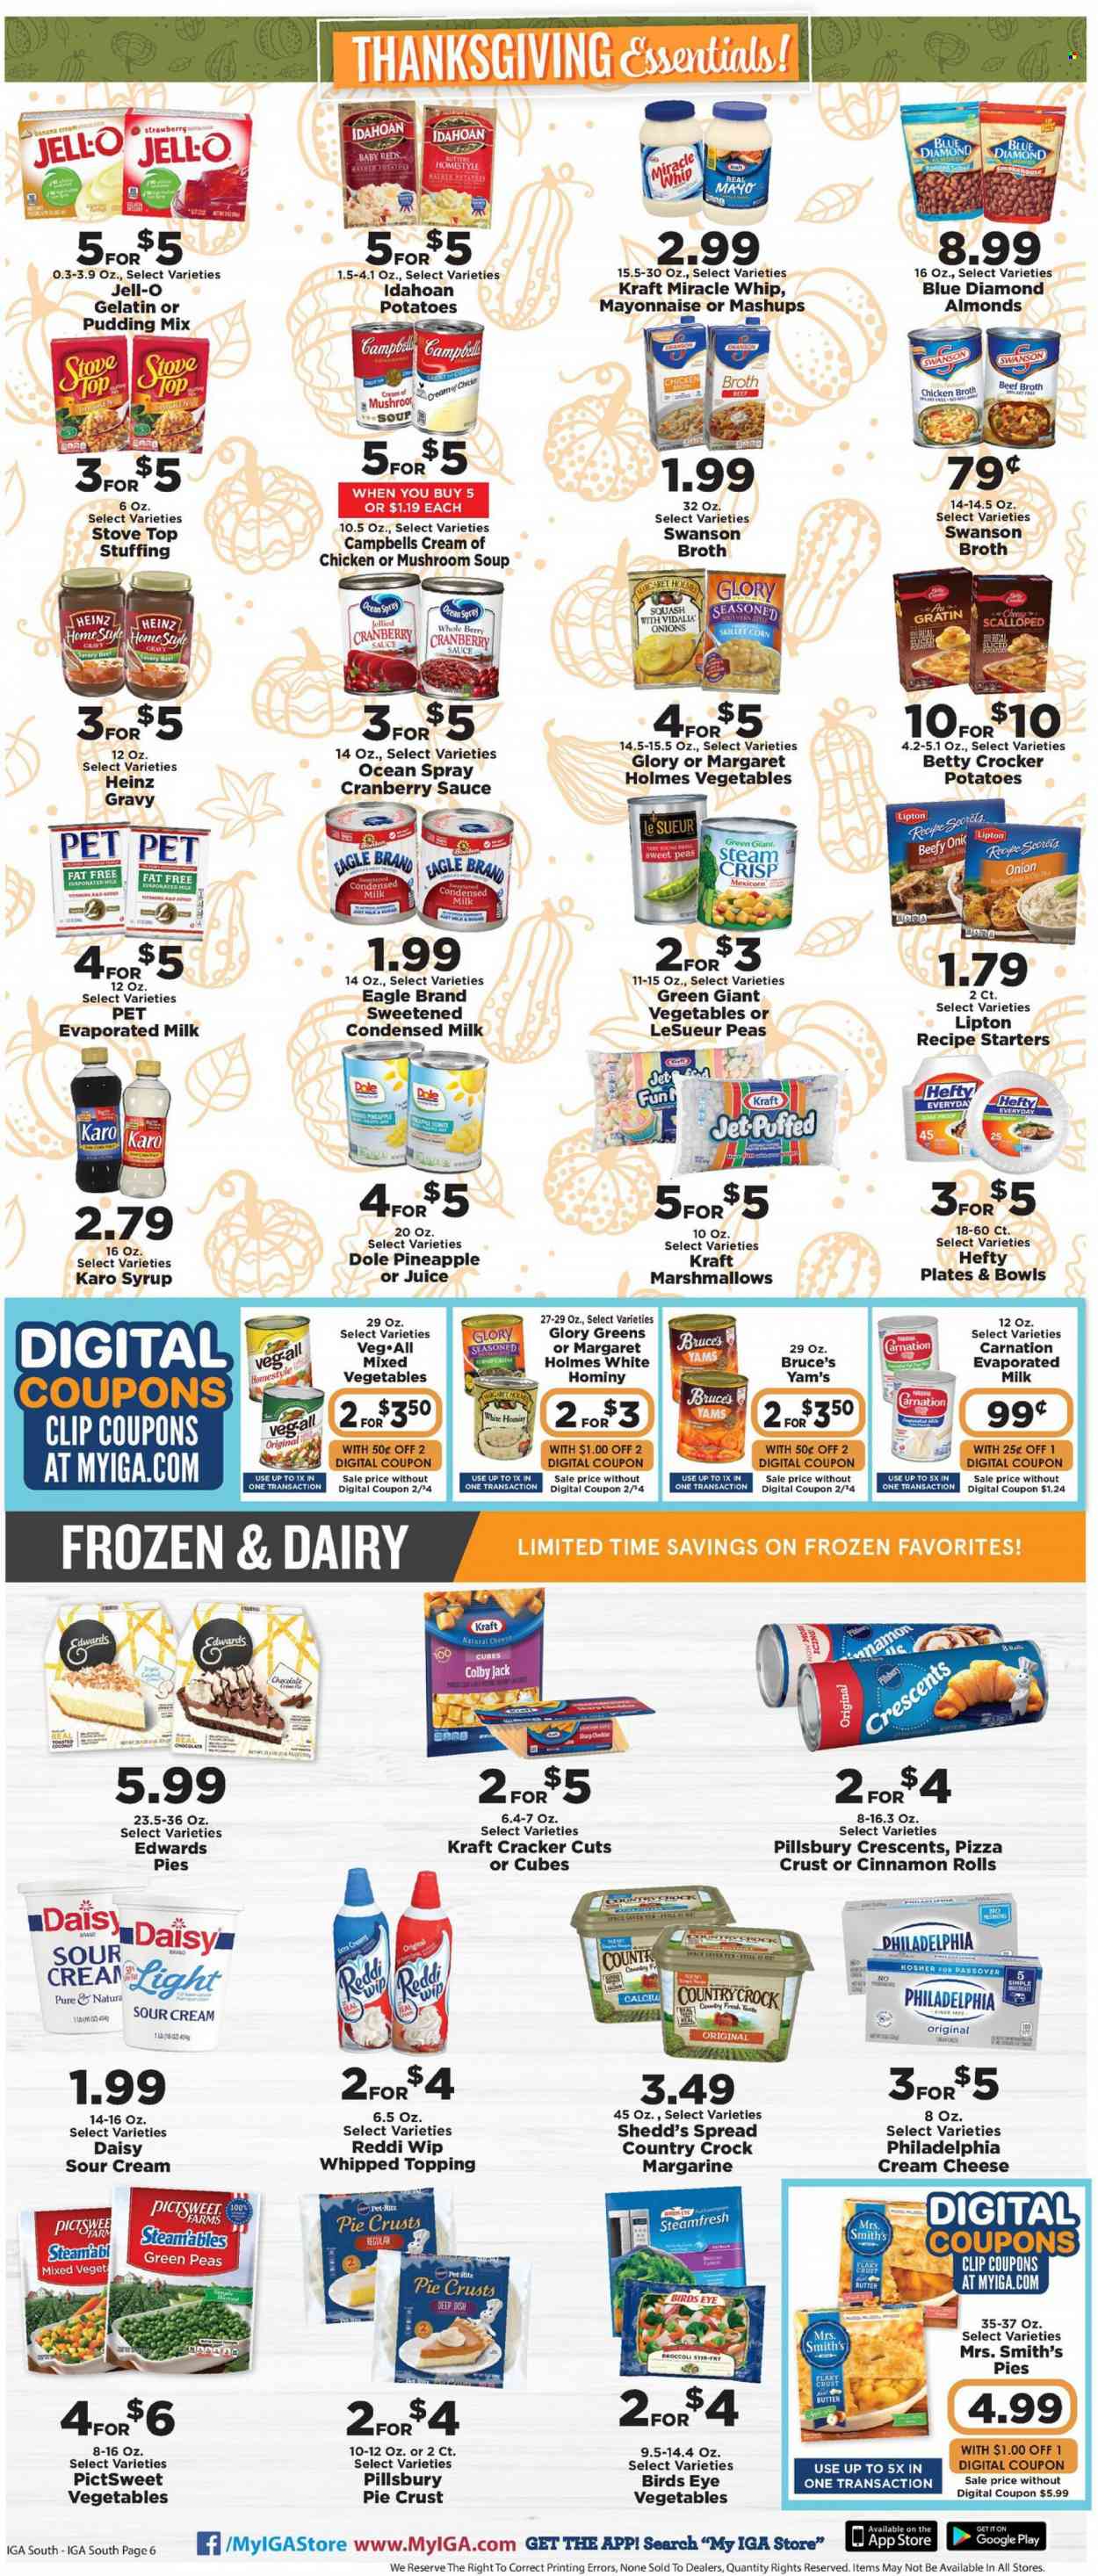 thumbnail - IGA Flyer - 11/17/2021 - 11/30/2021 - Sales products - cinnamon roll, broccoli, corn, Dole, mushroom soup, pizza, soup, sauce, Pillsbury, Bird's Eye, Kraft®, Colby cheese, cream cheese, Philadelphia, cheddar, pudding, evaporated milk, condensed milk, butter, margarine, sour cream, mayonnaise, Miracle Whip, marshmallows, chocolate, crackers, RITZ, Smith's, beef broth, sugar, pie crust, chicken broth, topping, Jell-O, broth, Heinz, cranberry sauce, syrup, almonds, Blue Diamond, juice, Lipton, Jet, Hefty, plate. Page 6.